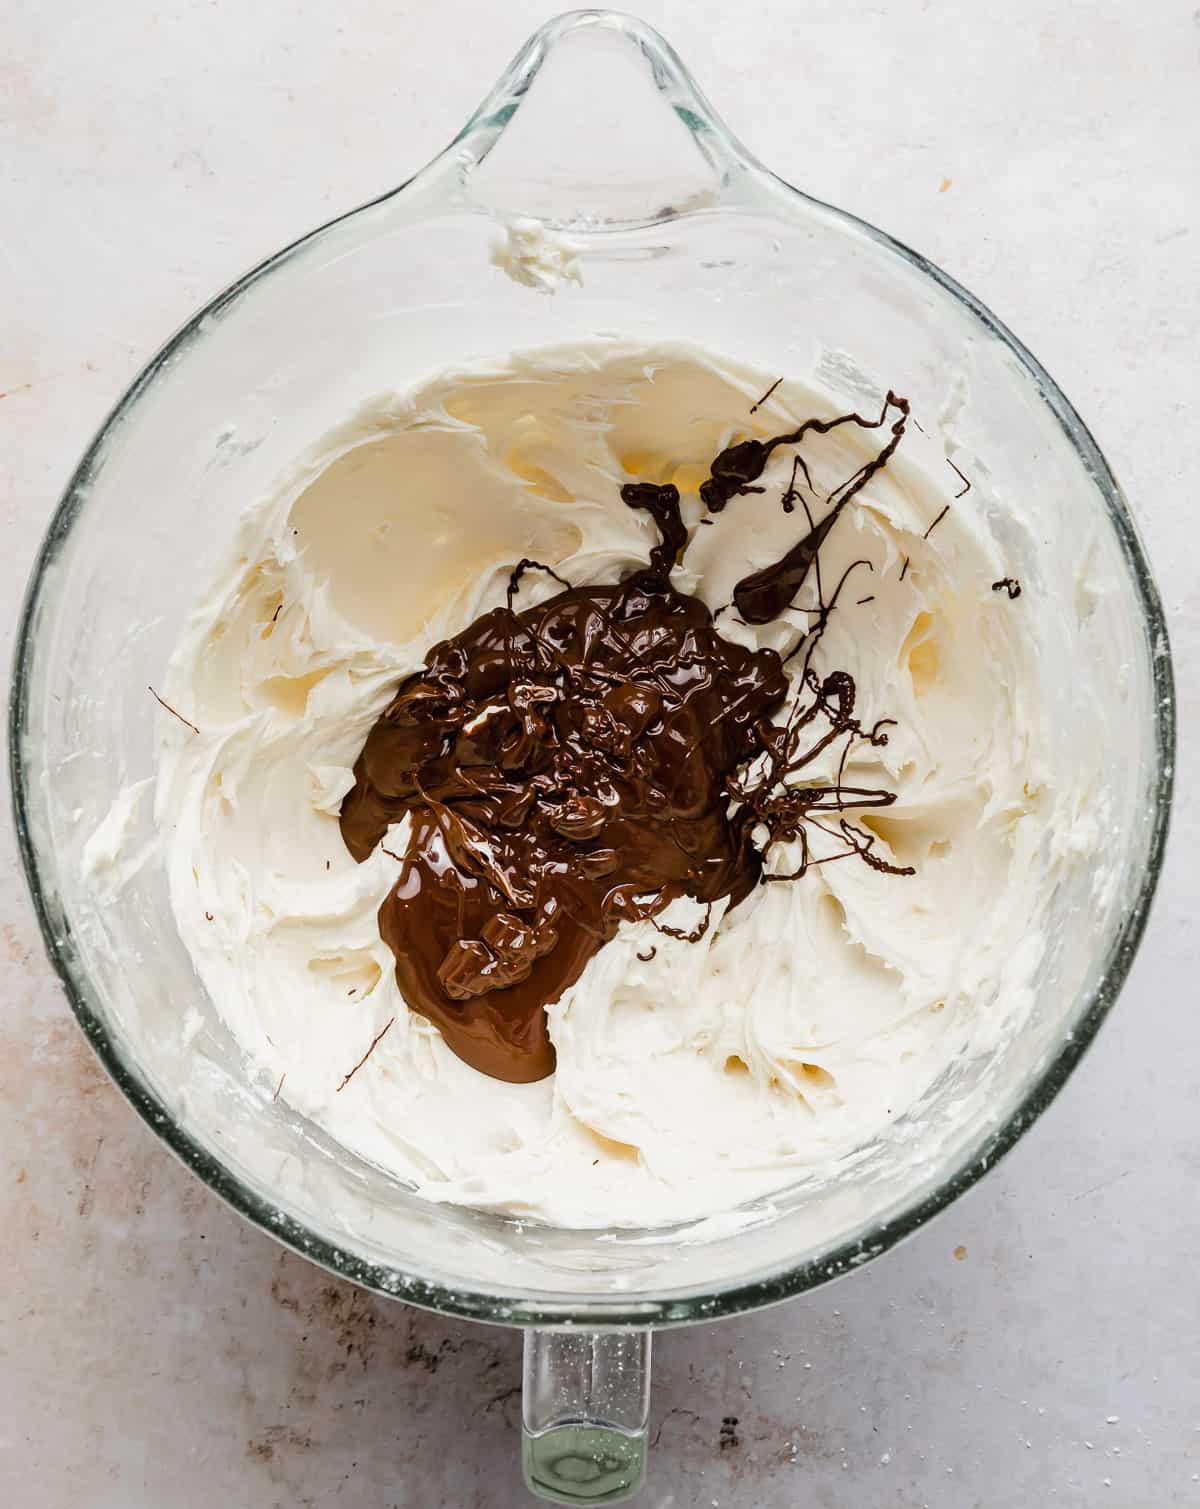 Creamed butter and powdered sugar in a stand mixer bowl with melted chocolate poured overtop.